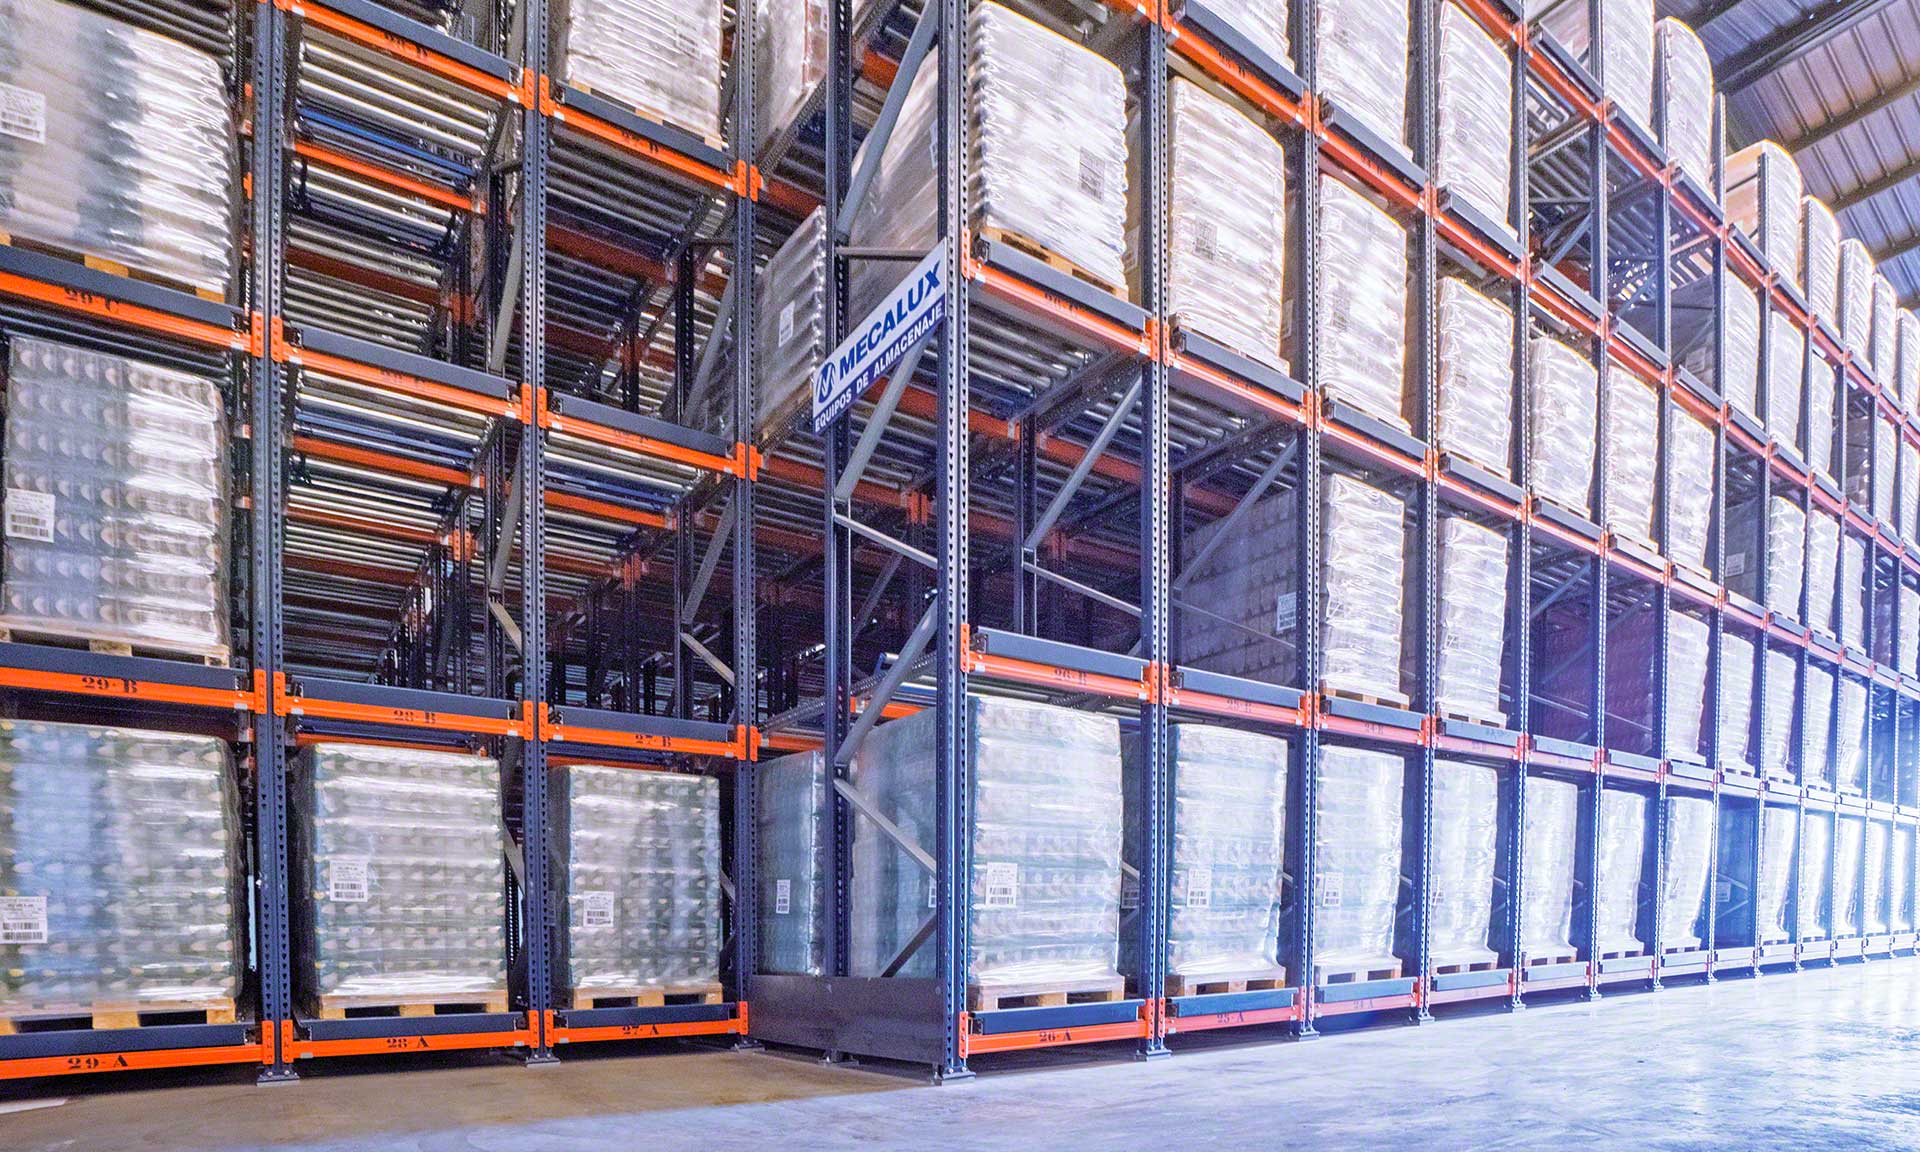 Live pallet racking with 141 storage channels to manage more than 1,000 tonnes of rice